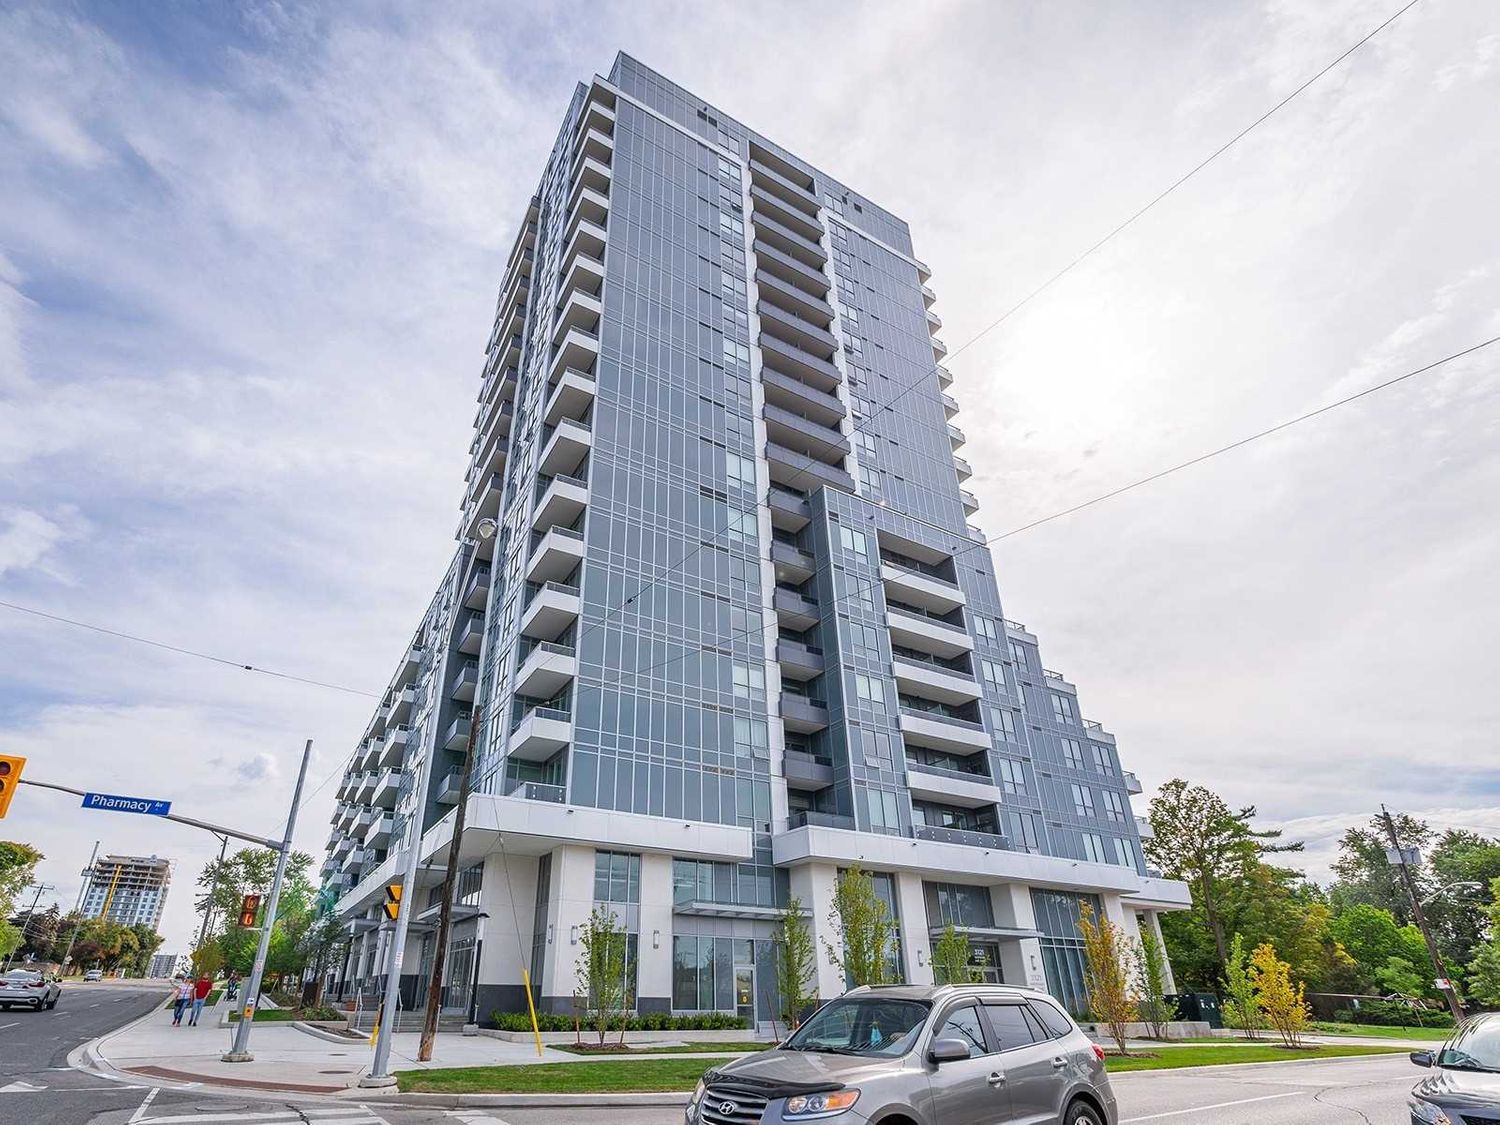 3121 Sheppard Avenue E. Wish Condos is located in  Scarborough, Toronto - image #2 of 3